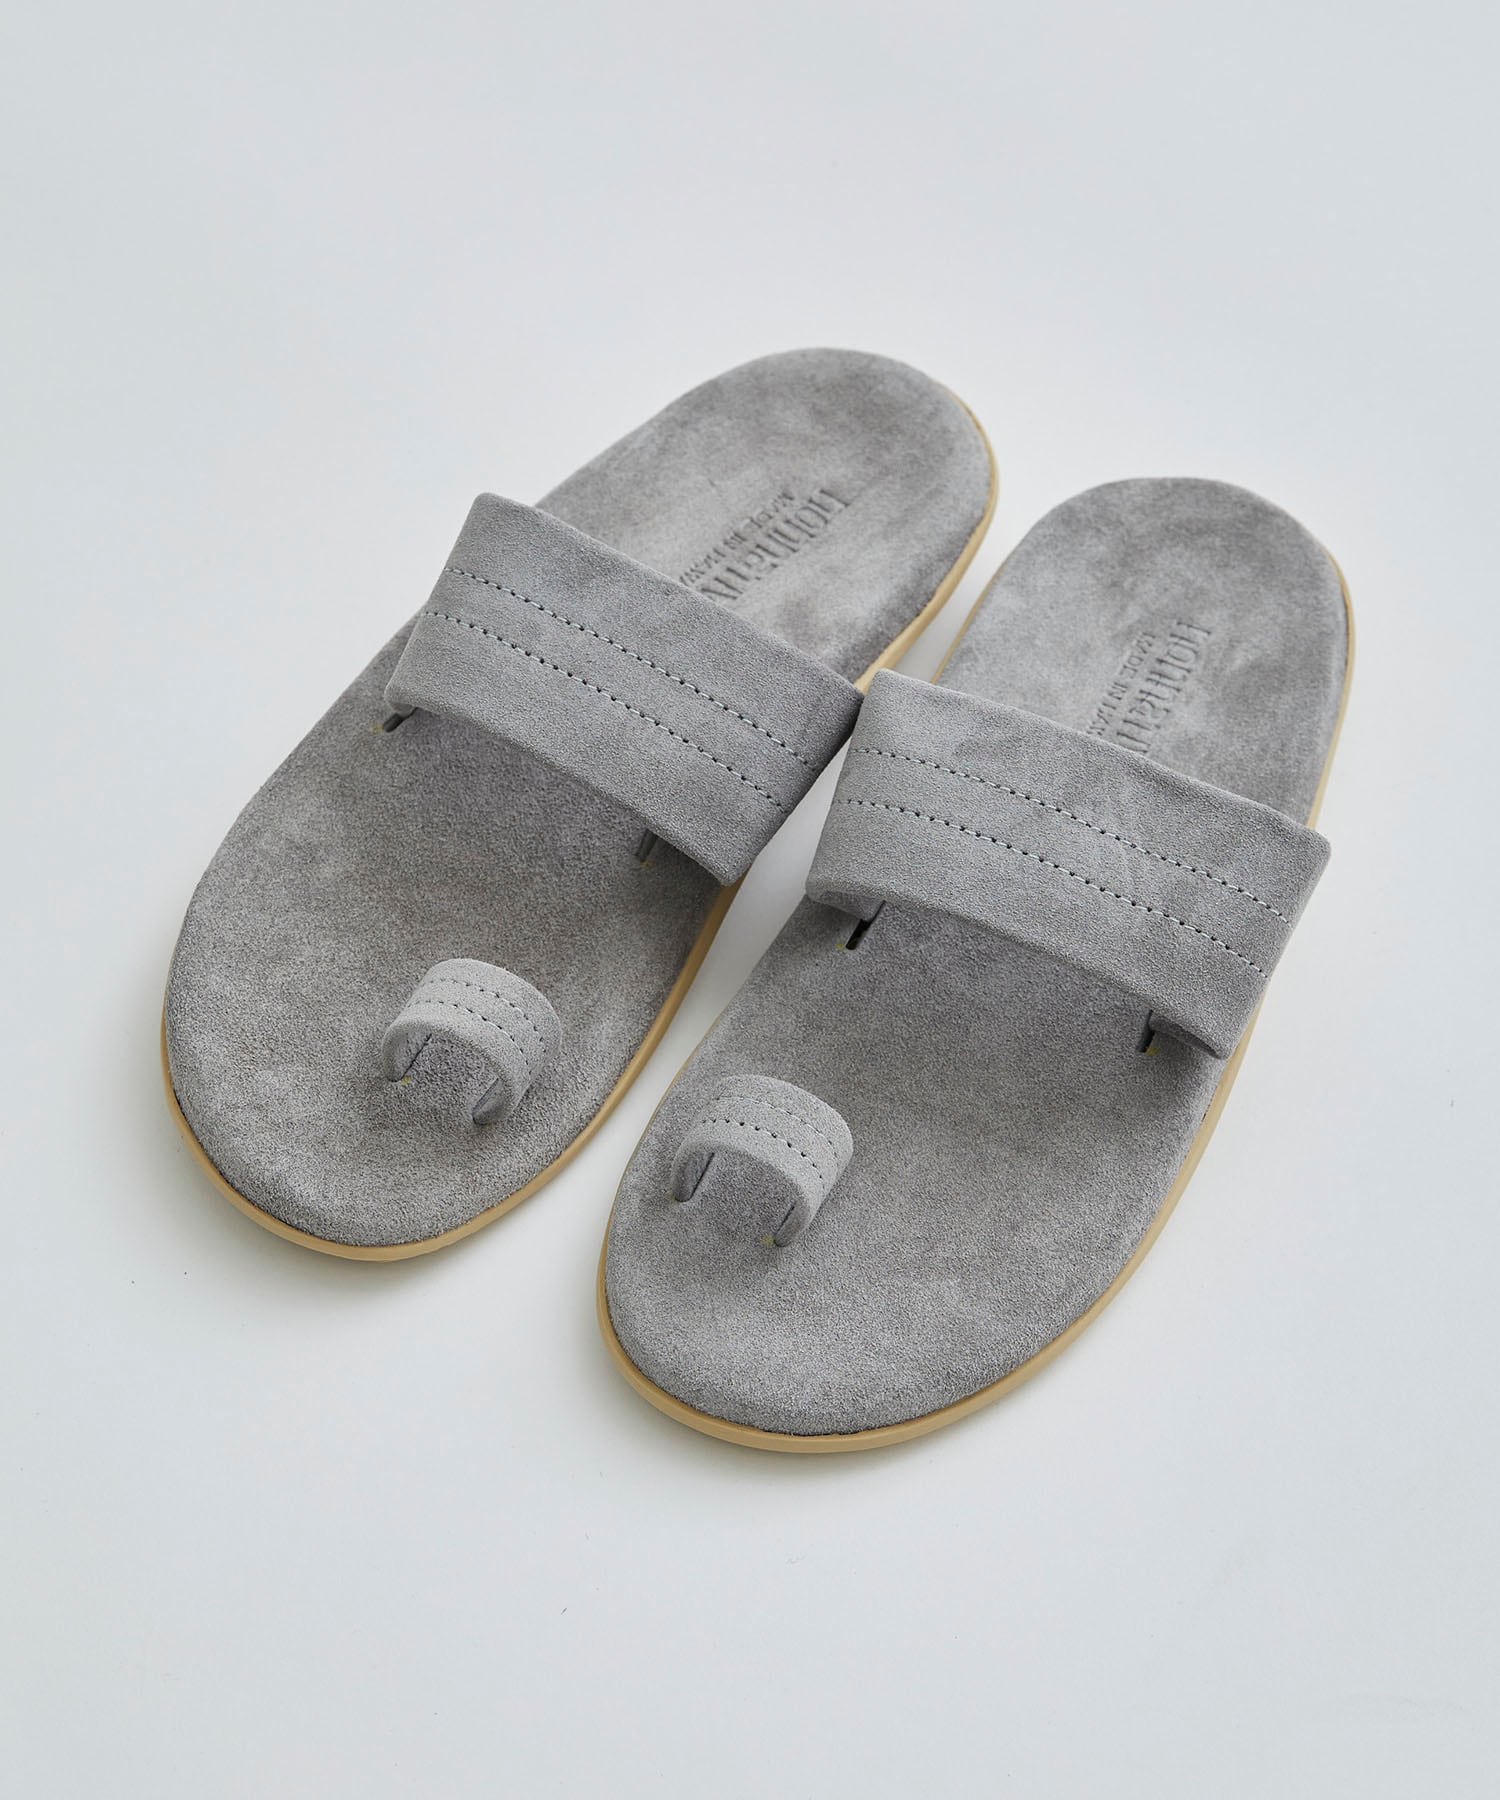 RANCHER SANDAL COW LEATHER BY ISLAND SLIPPER NONNATIVE